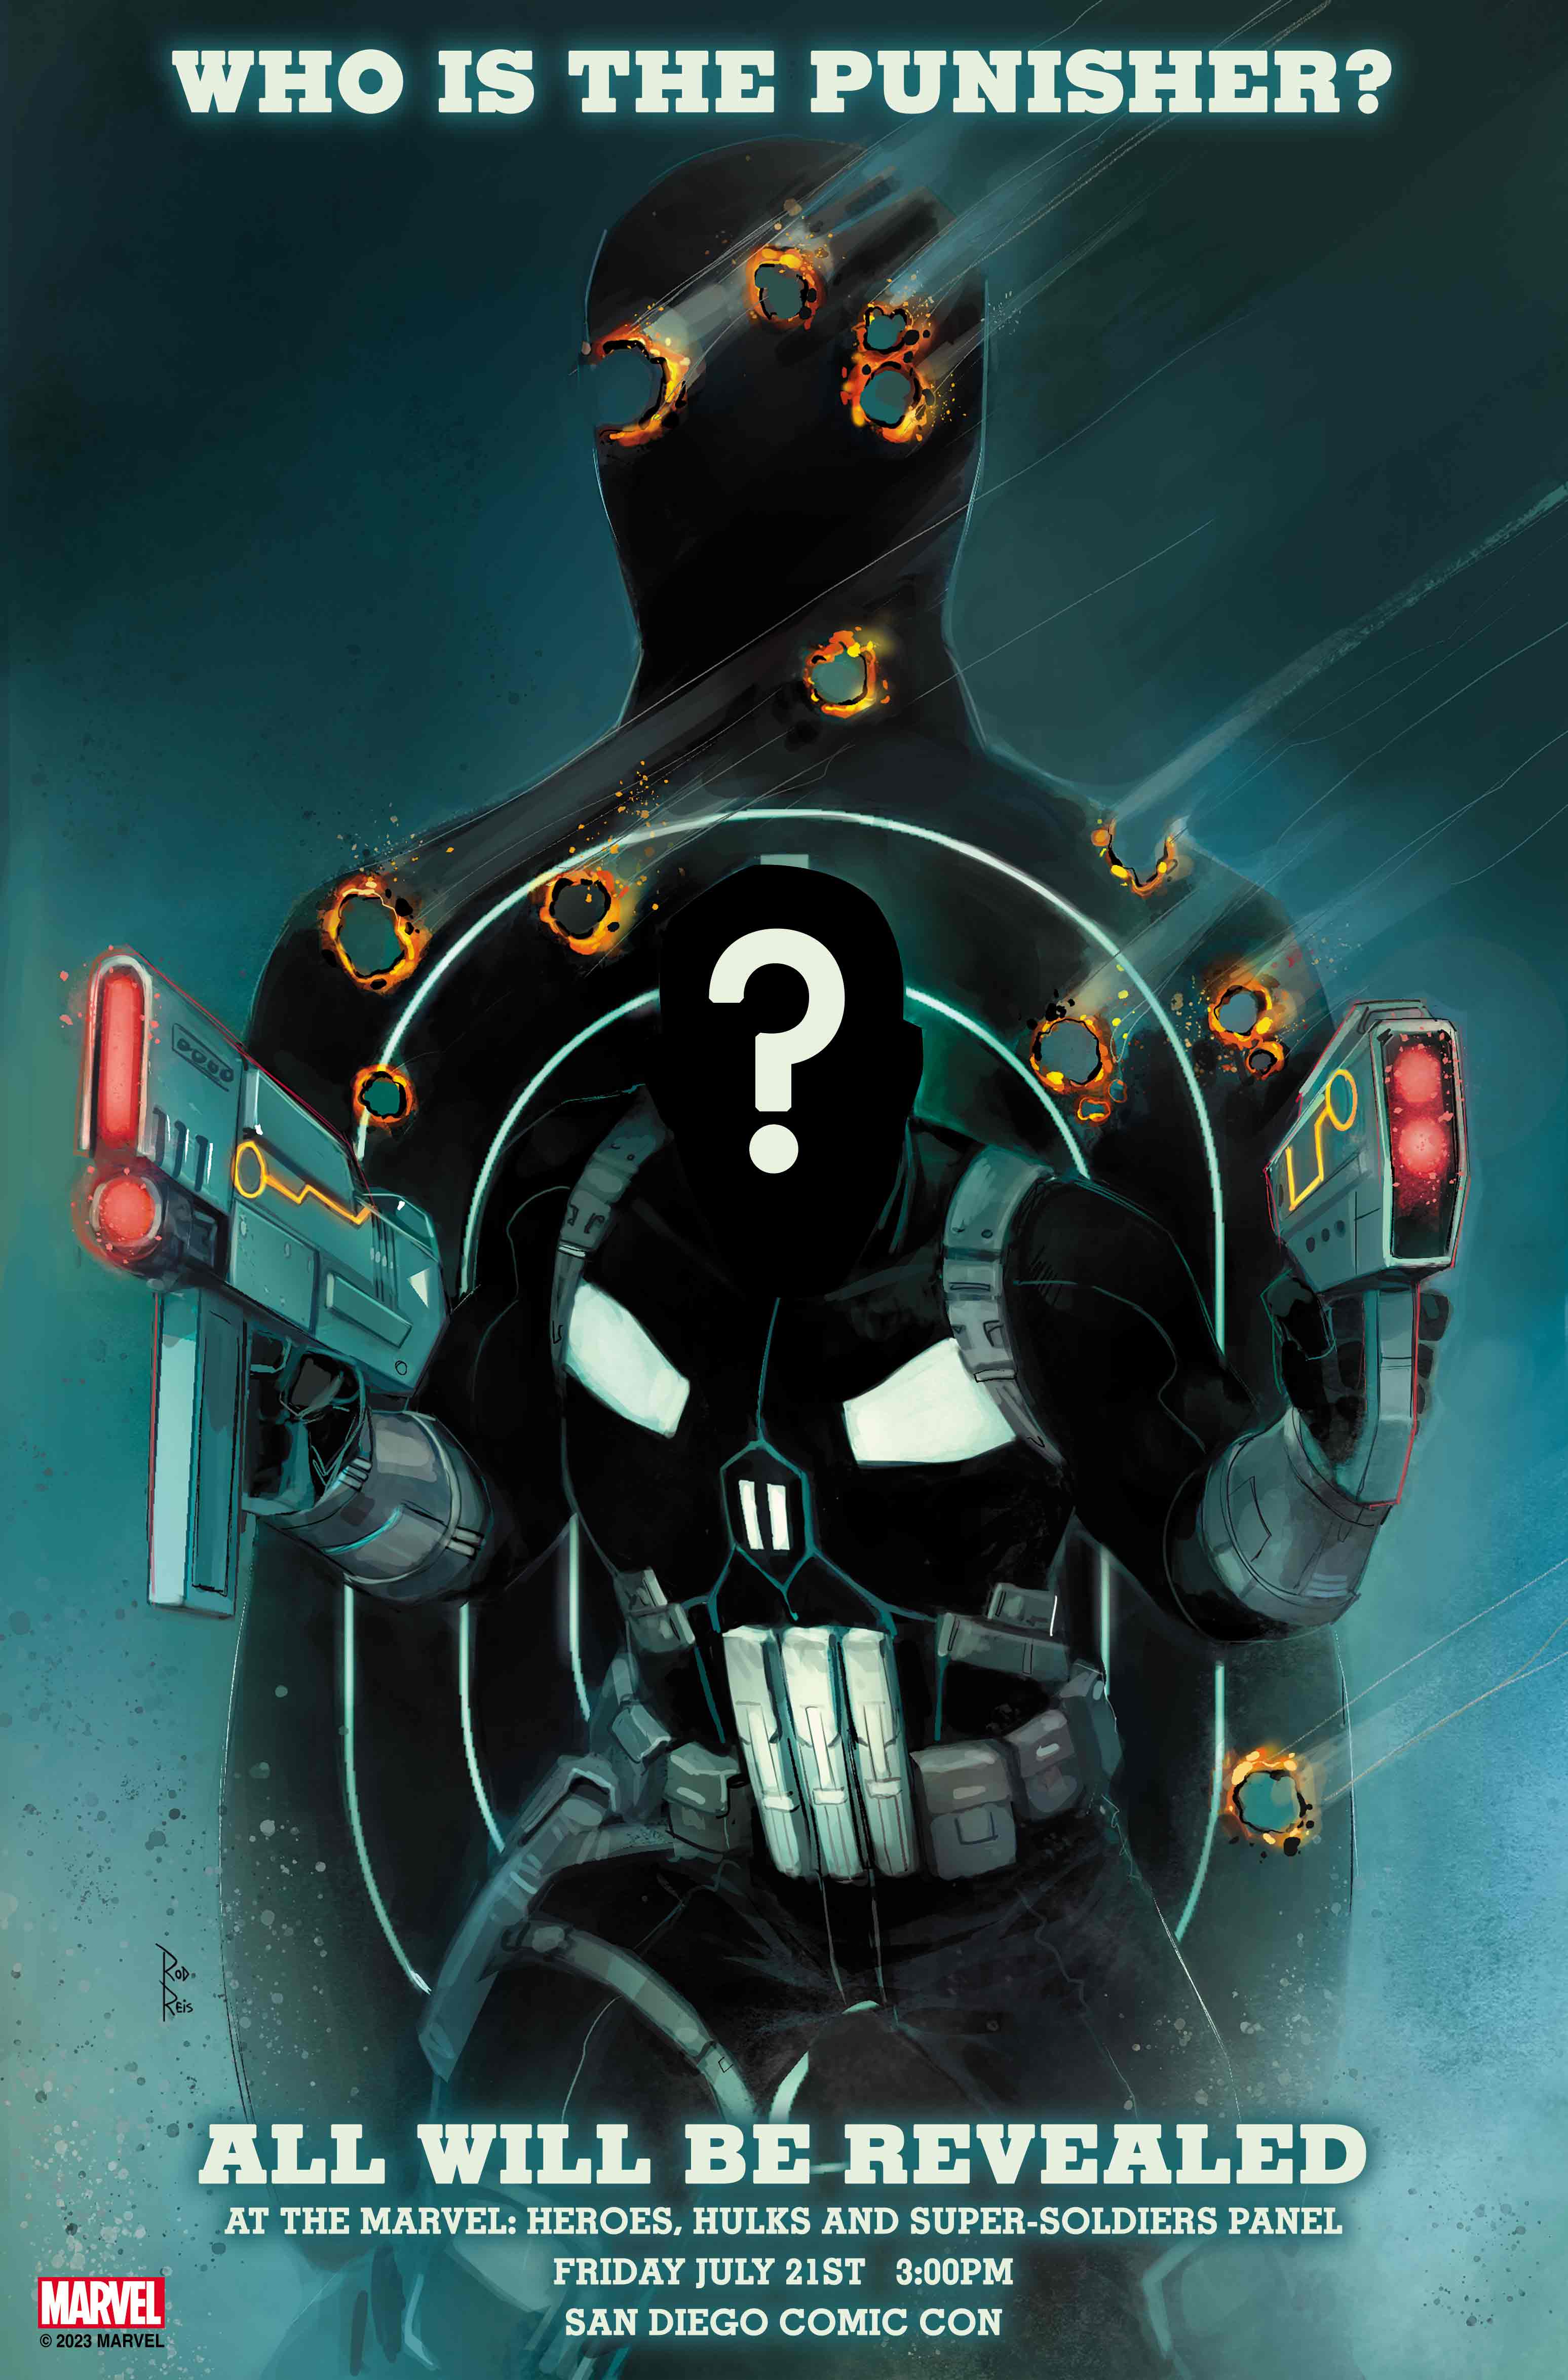 The Punisher #225 Review: The Punisher vs. the Avengers